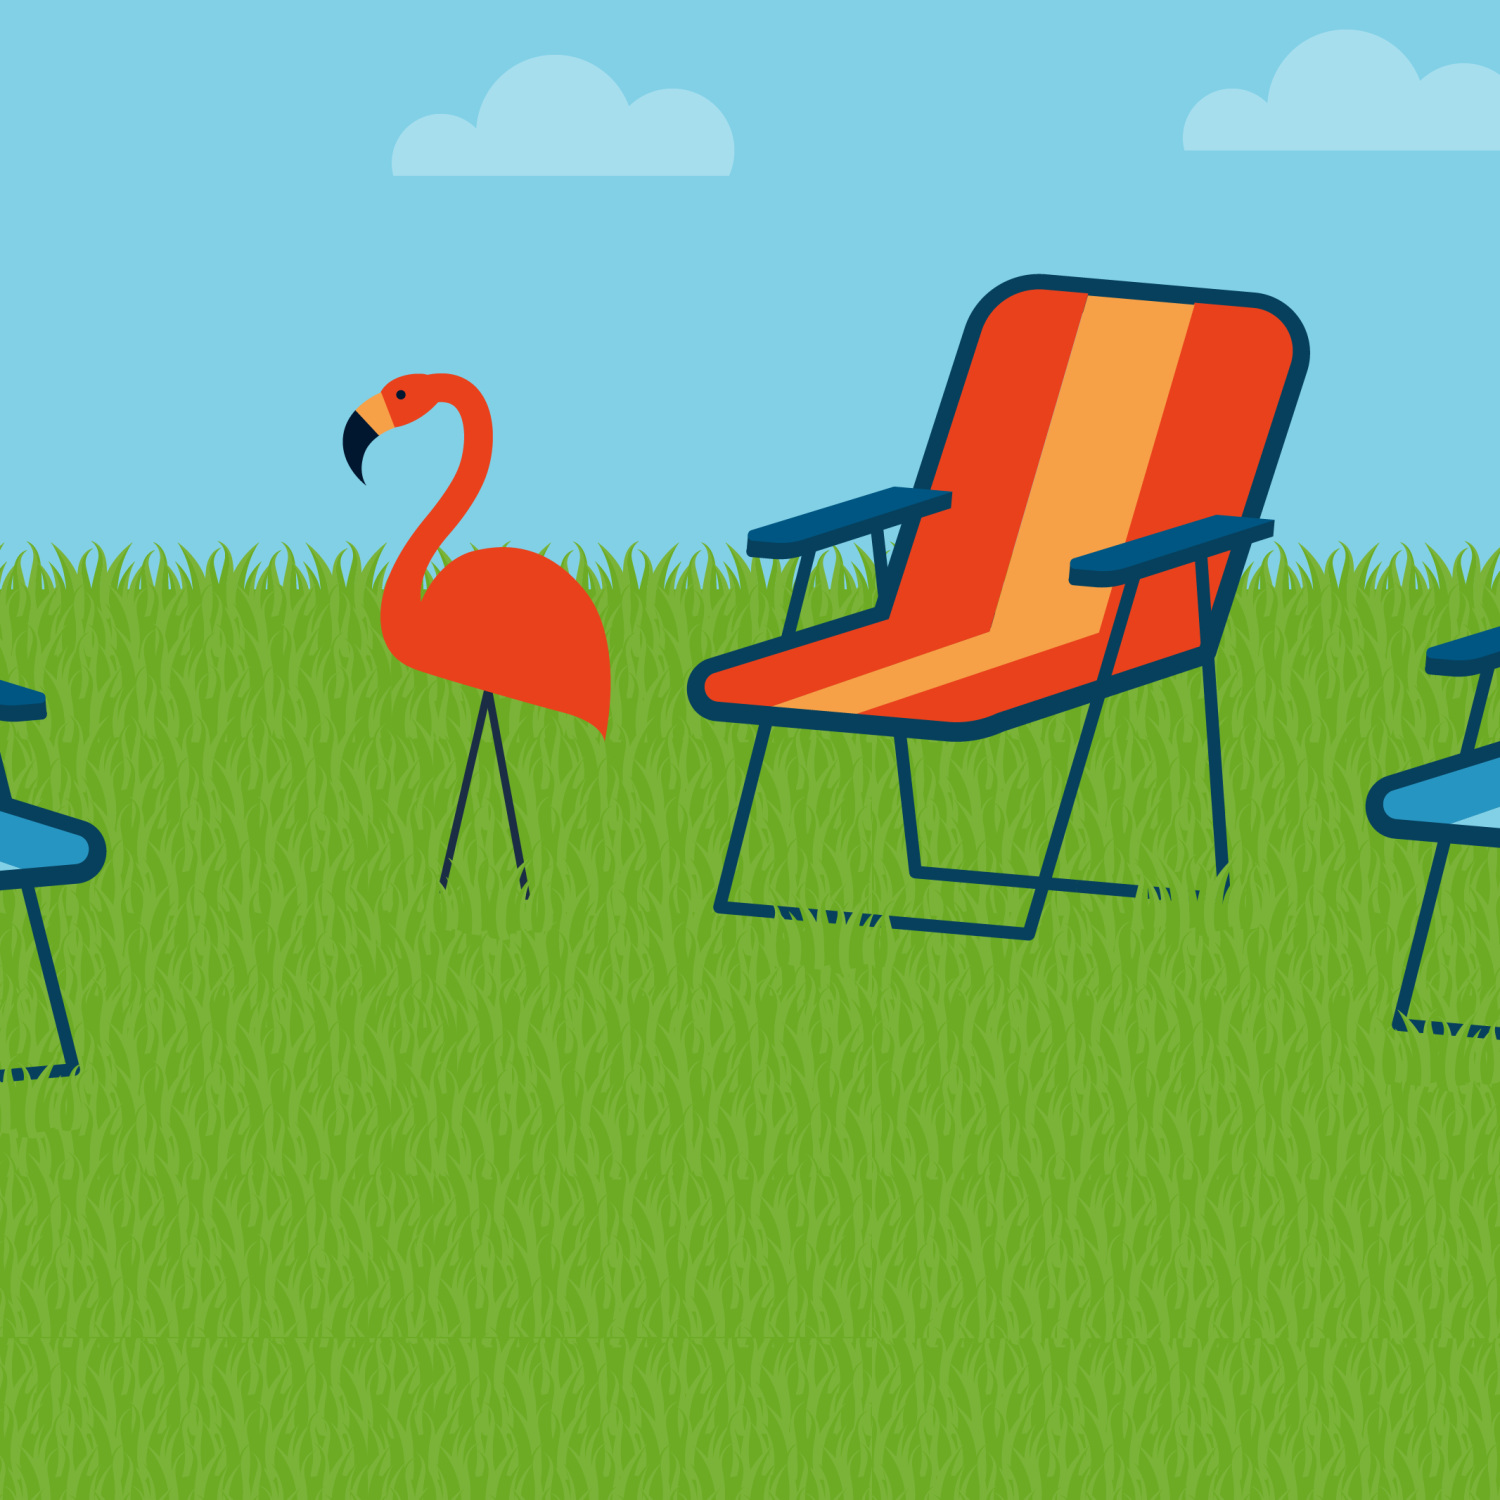 illustration of bright colored lawn chairs and a flamingo yard ornament on grass